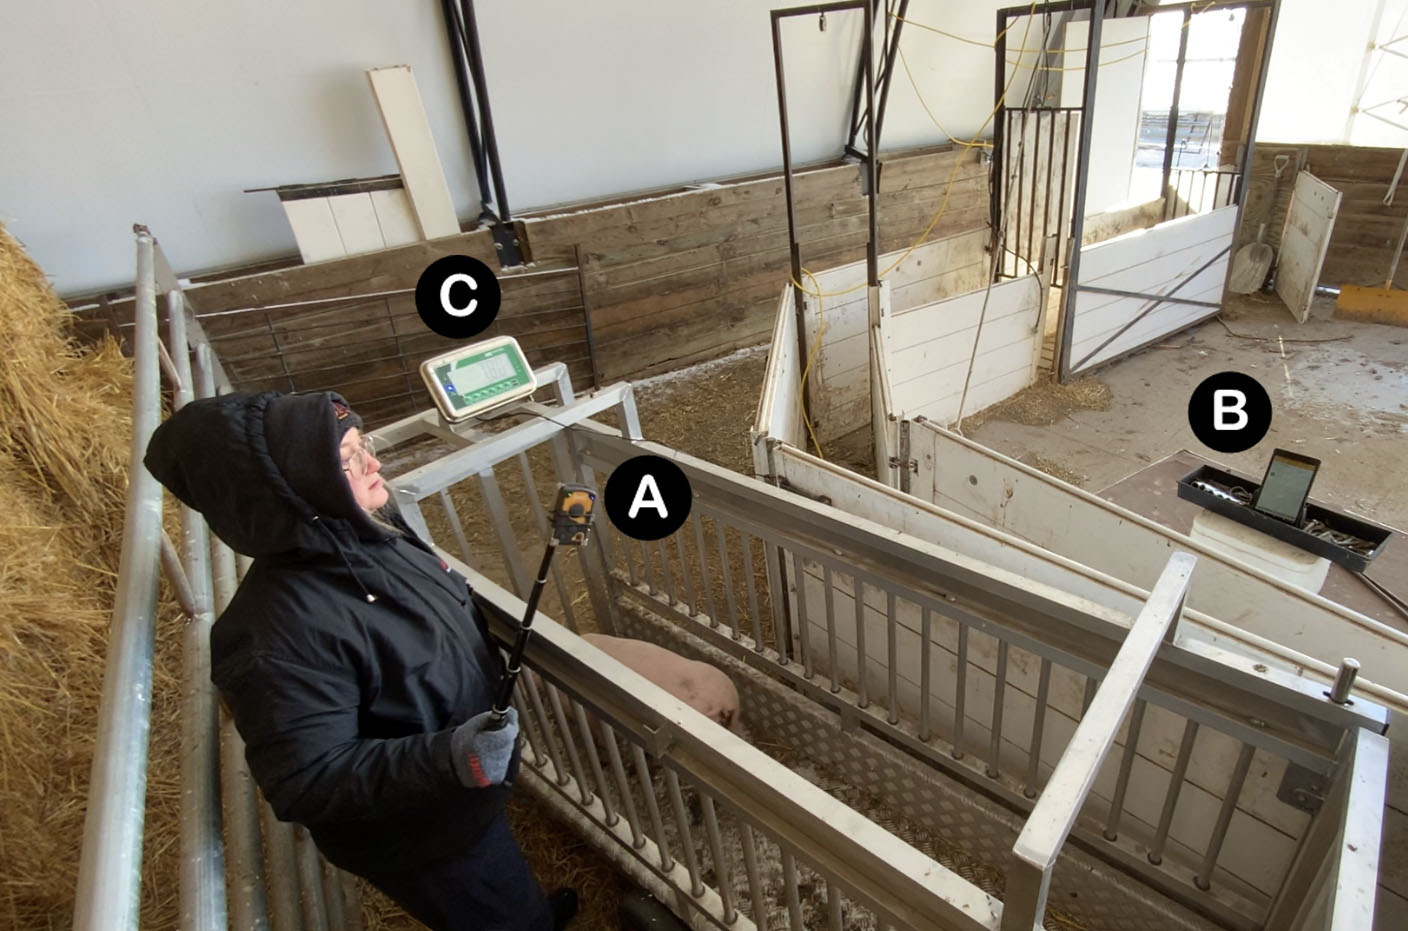 LeeO Systems for weighing pigs